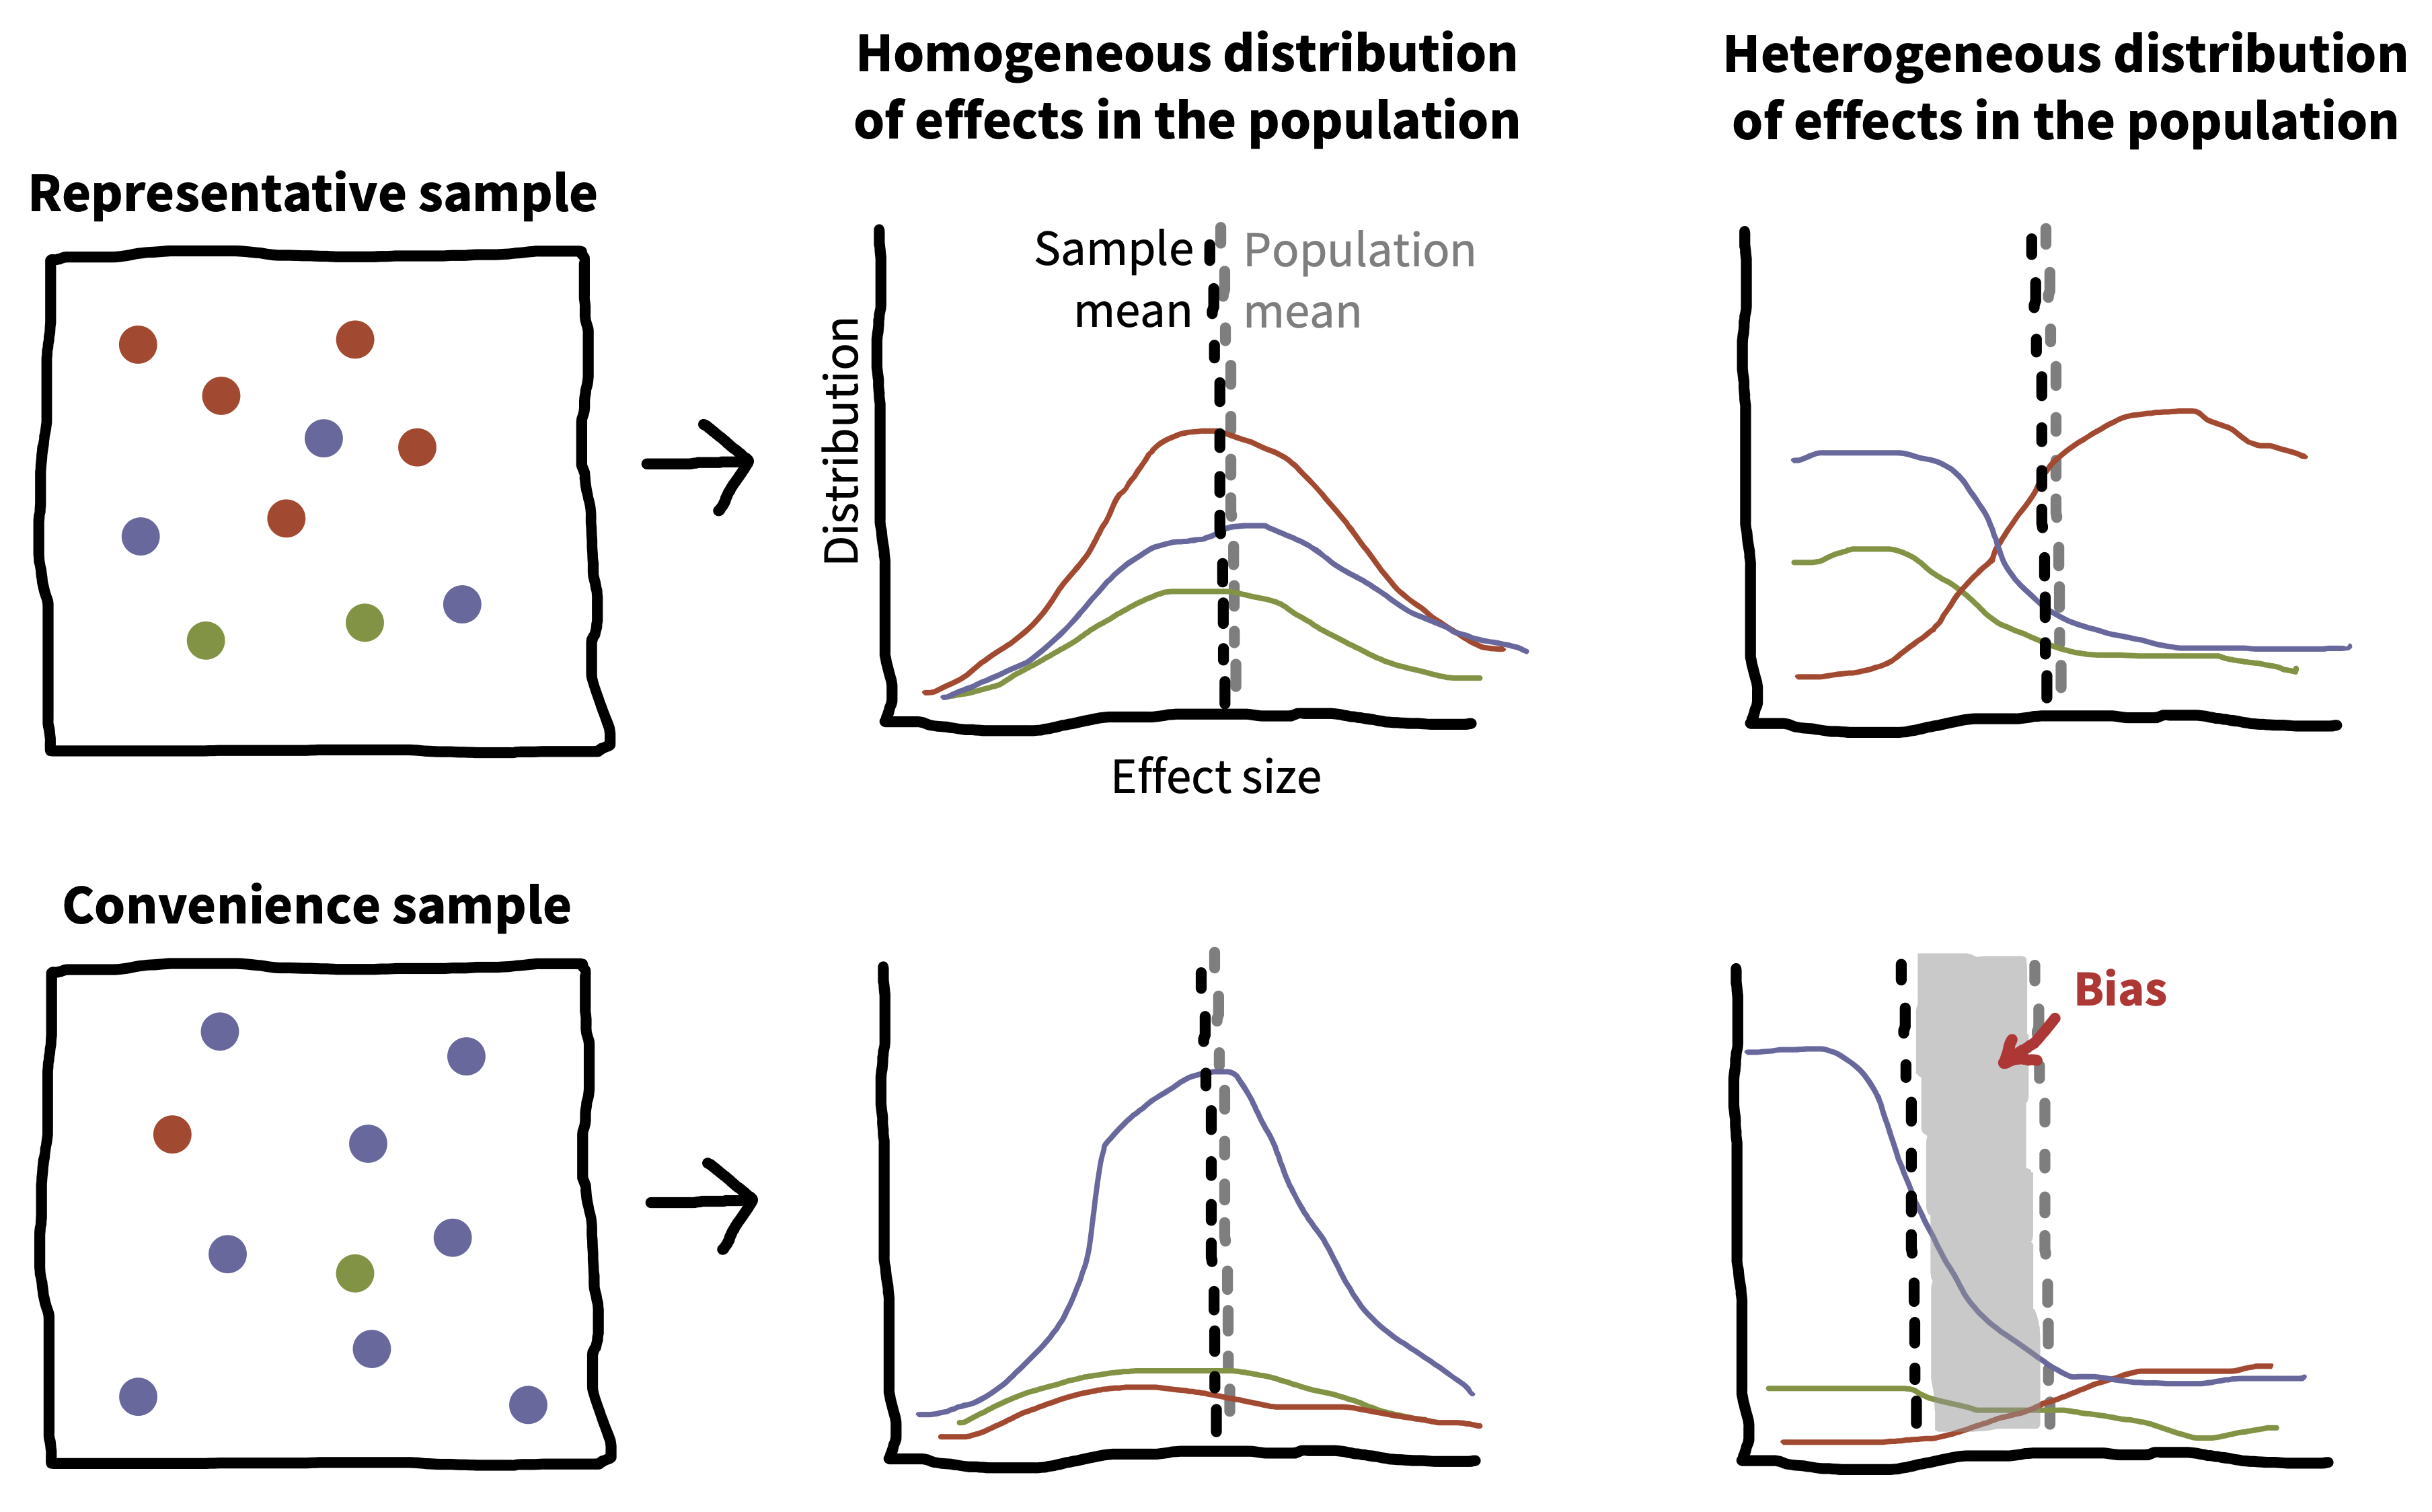 Illustration of the interaction of heterogeneity and convenience samples. Left hand panels show sample composition. Individual plots show the weighted distribution of responses on some measure.